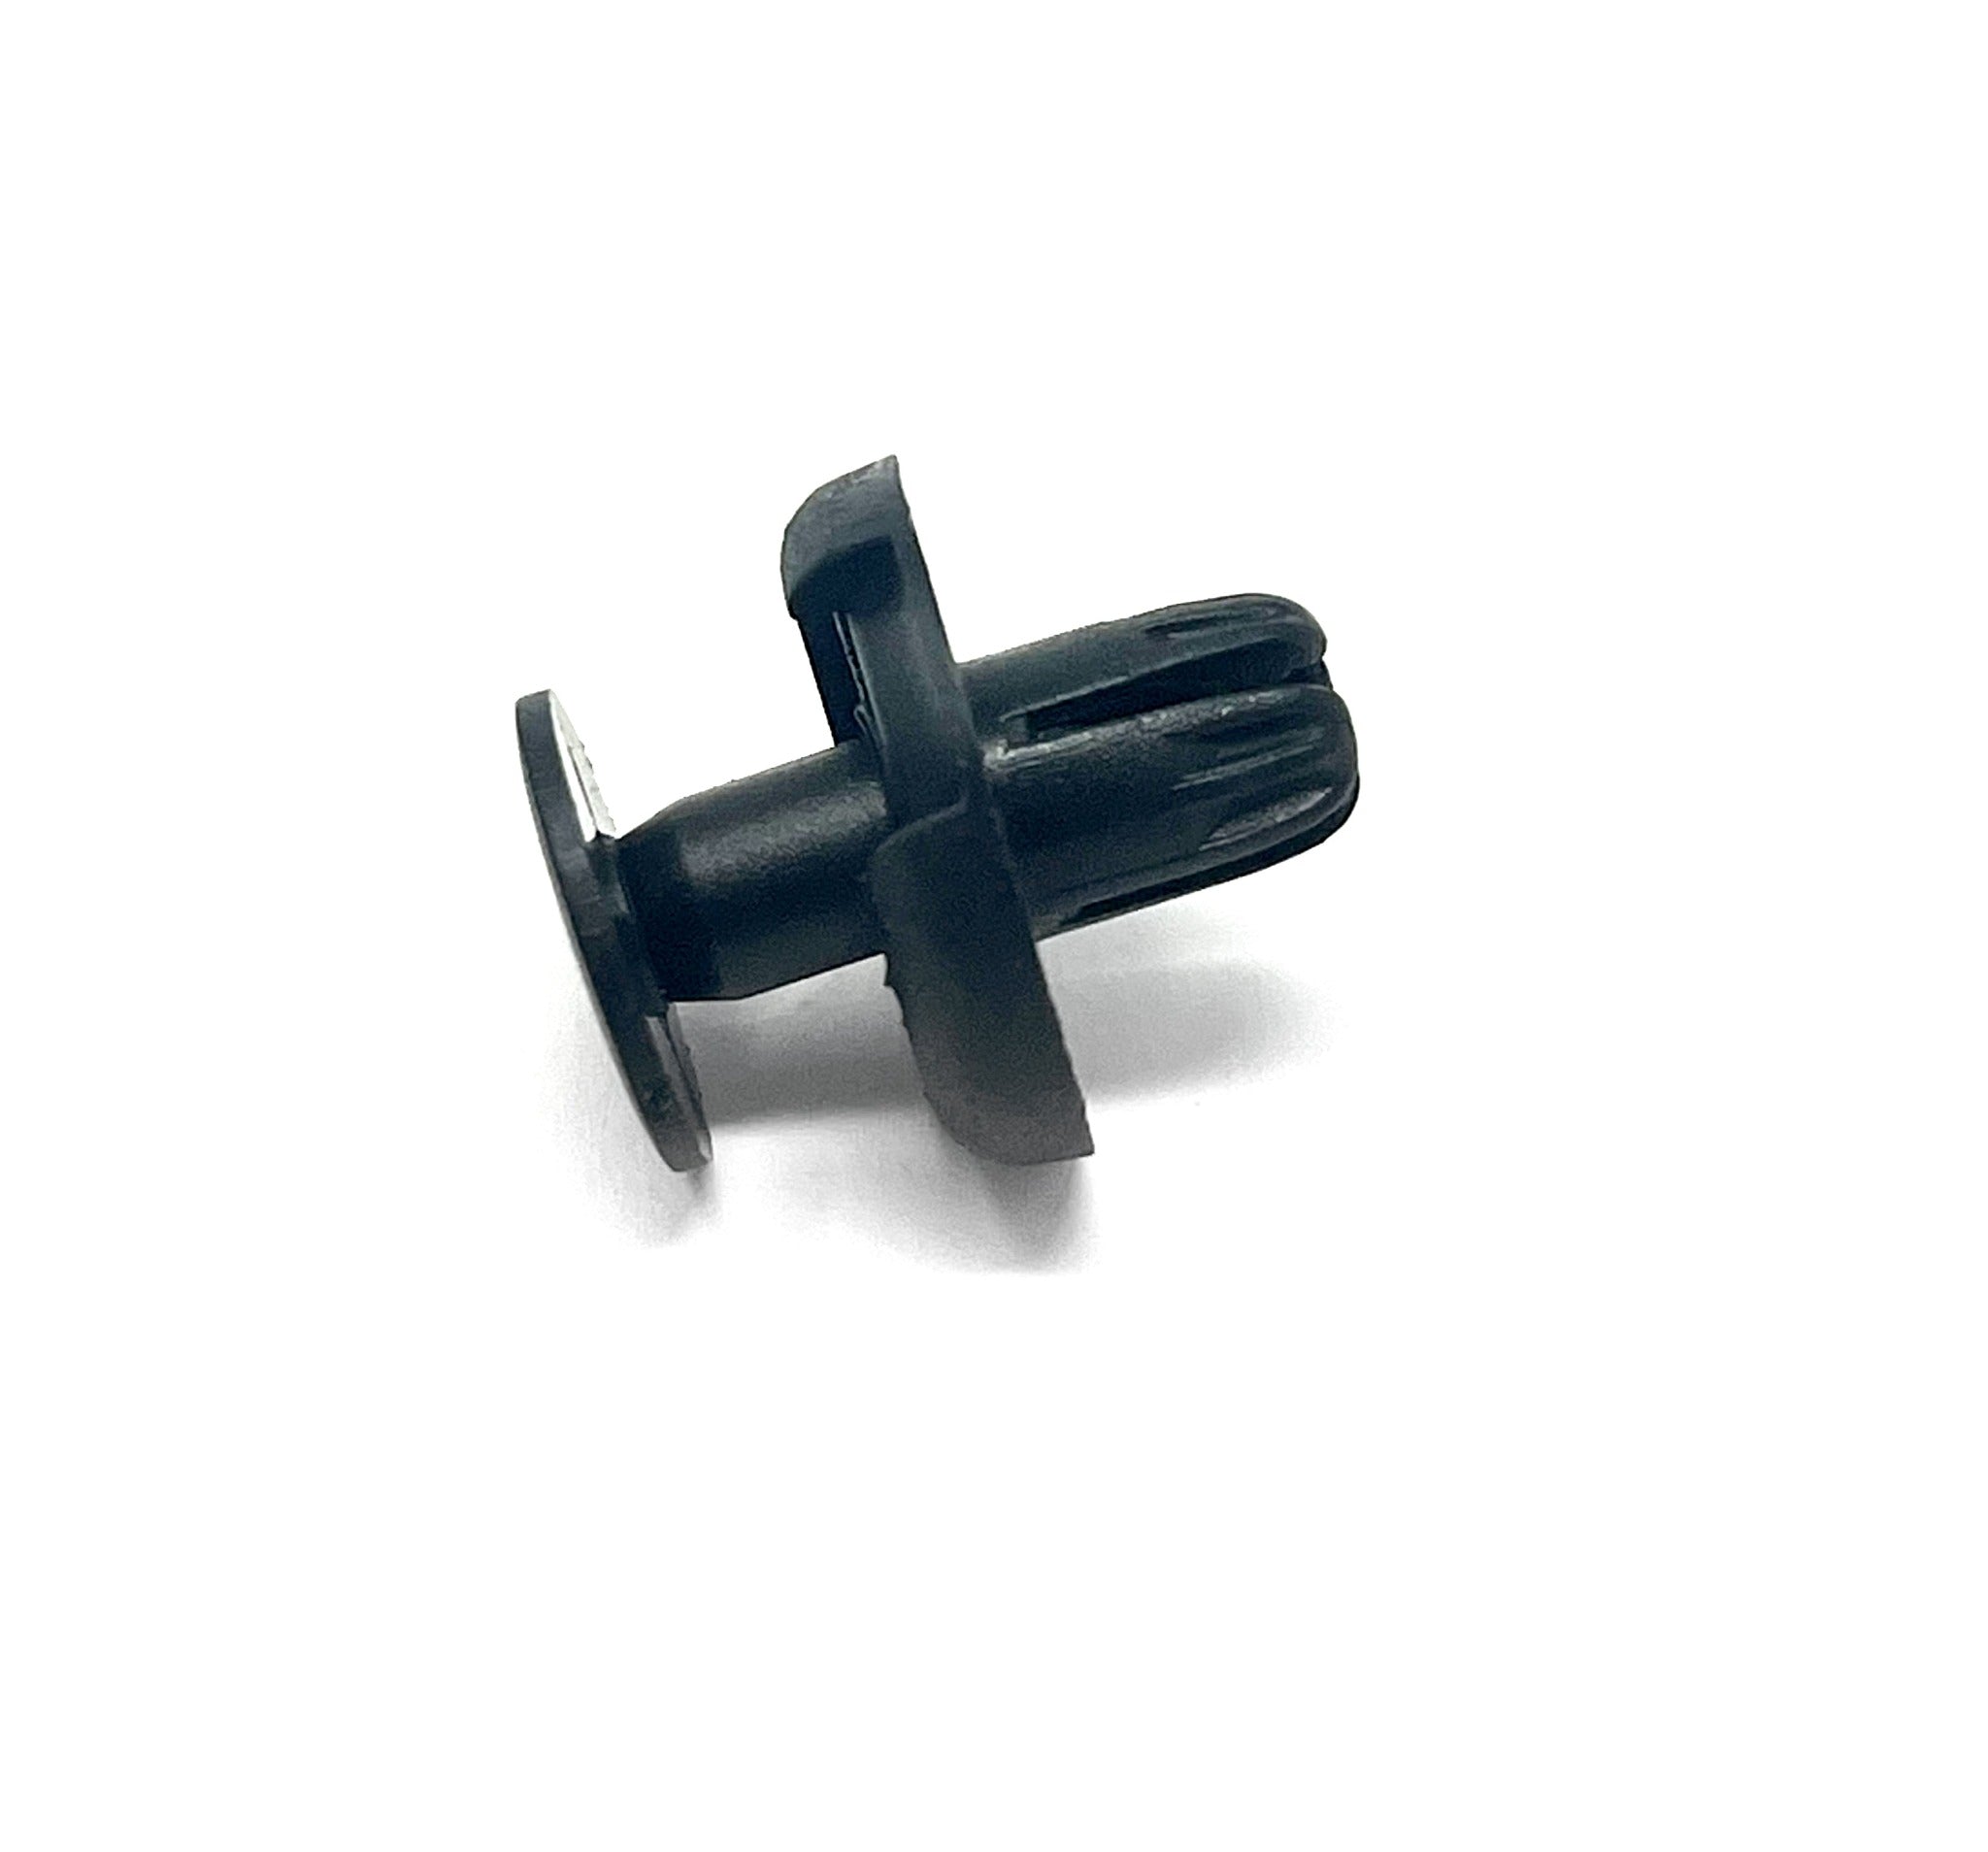 Black Nylon Front Bumper Push Type Retainer Head Diameter 20mm, Stem Length 13mm, Fits Into 10mm Hole (Pack of 25)